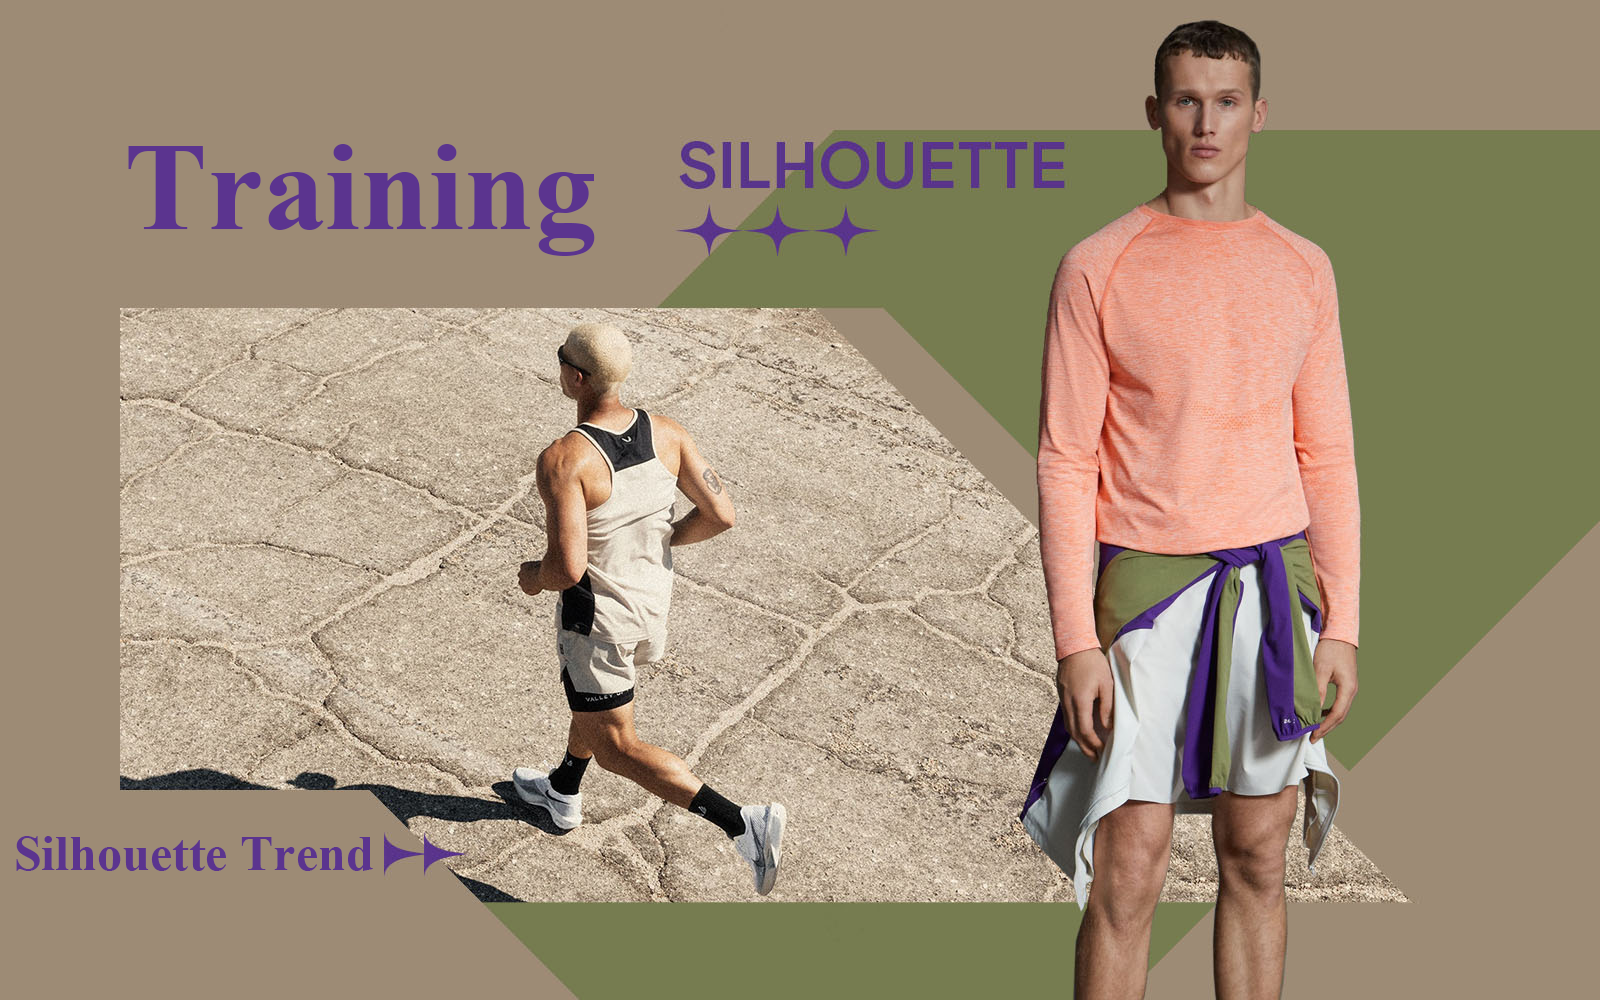 The Silhouette Trend for Men's Training Wear